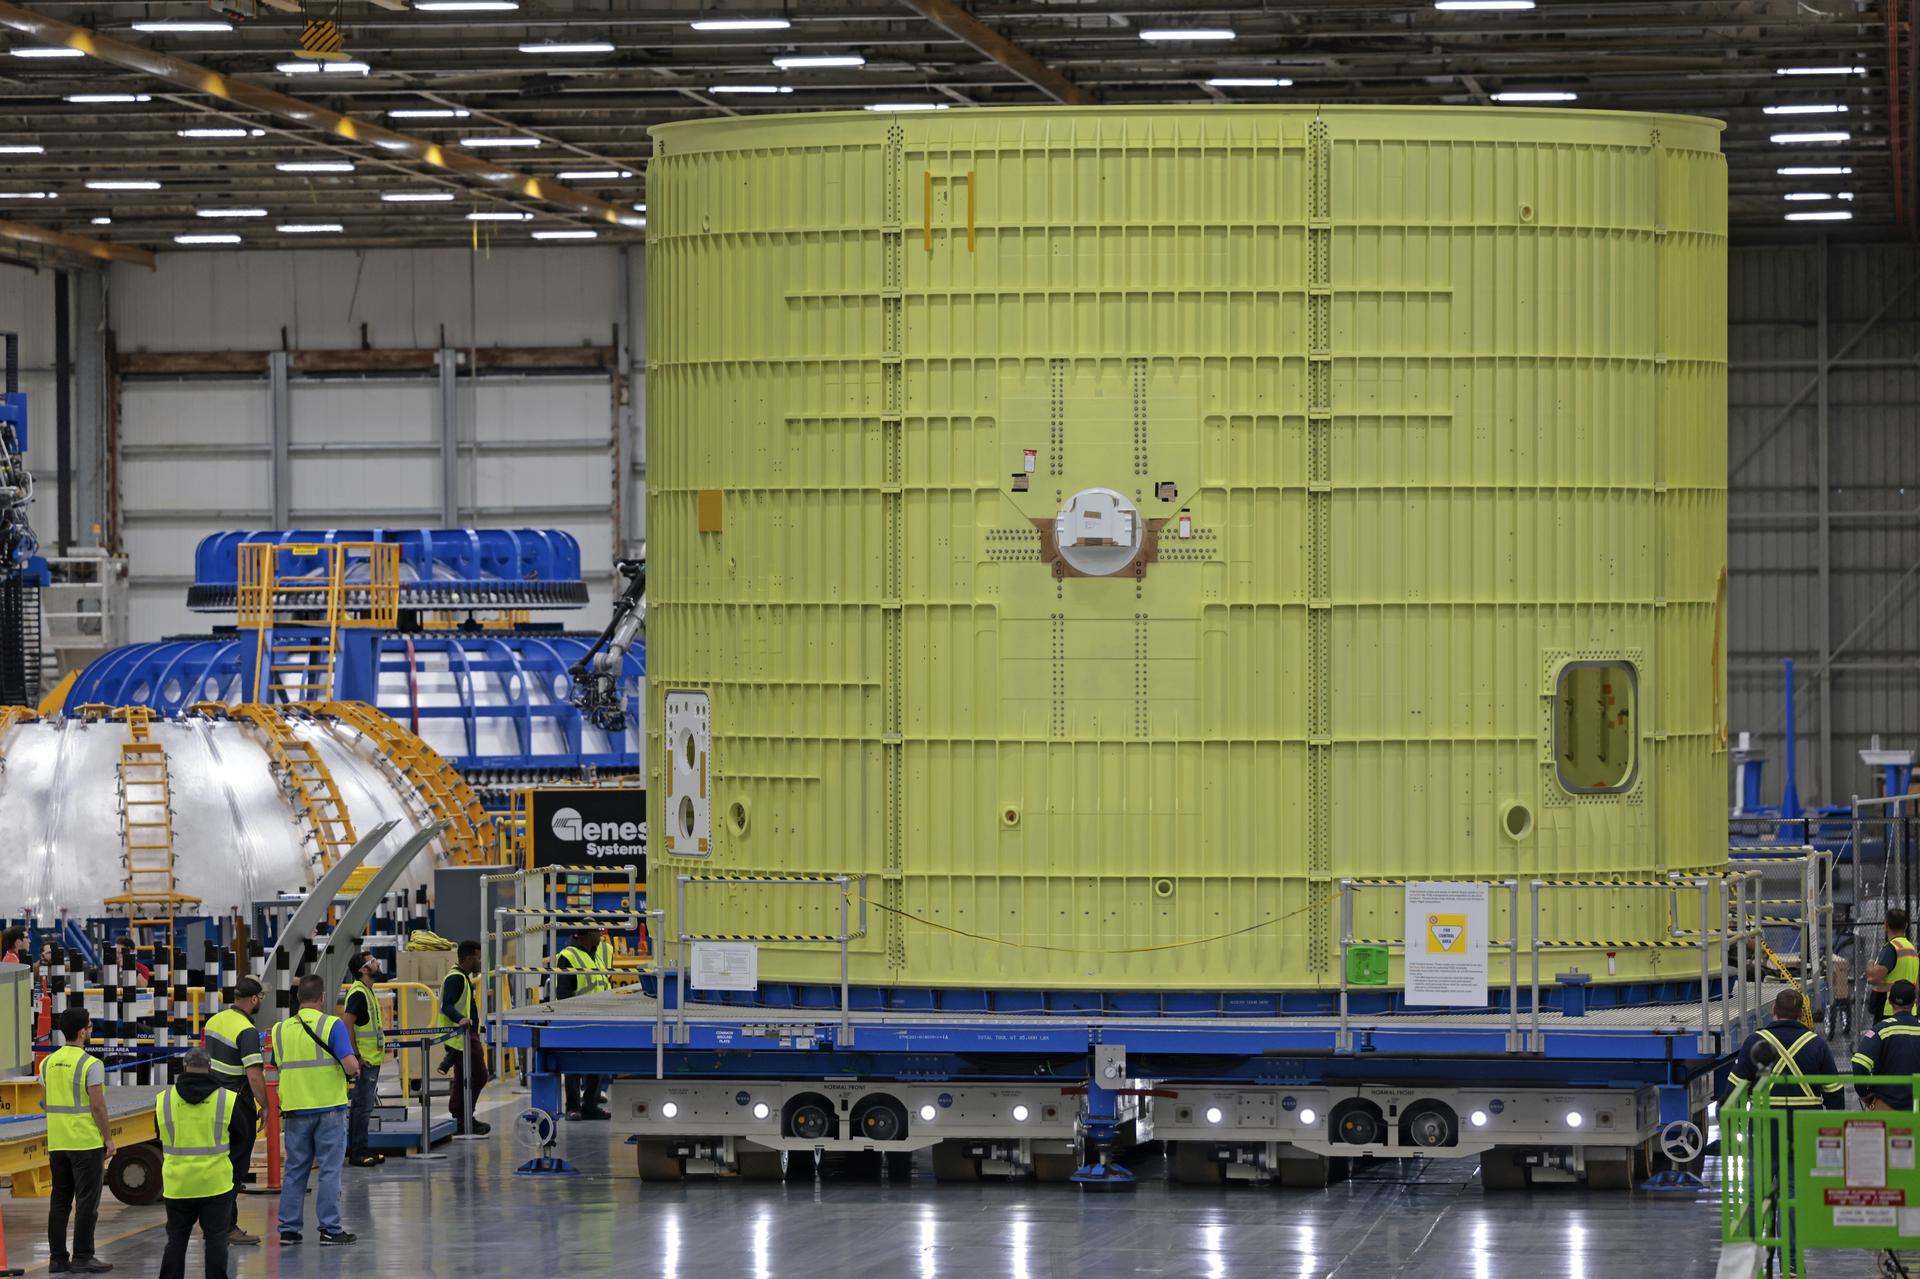 Featured image for “NASA Moves Core Stage 3 Intertank”